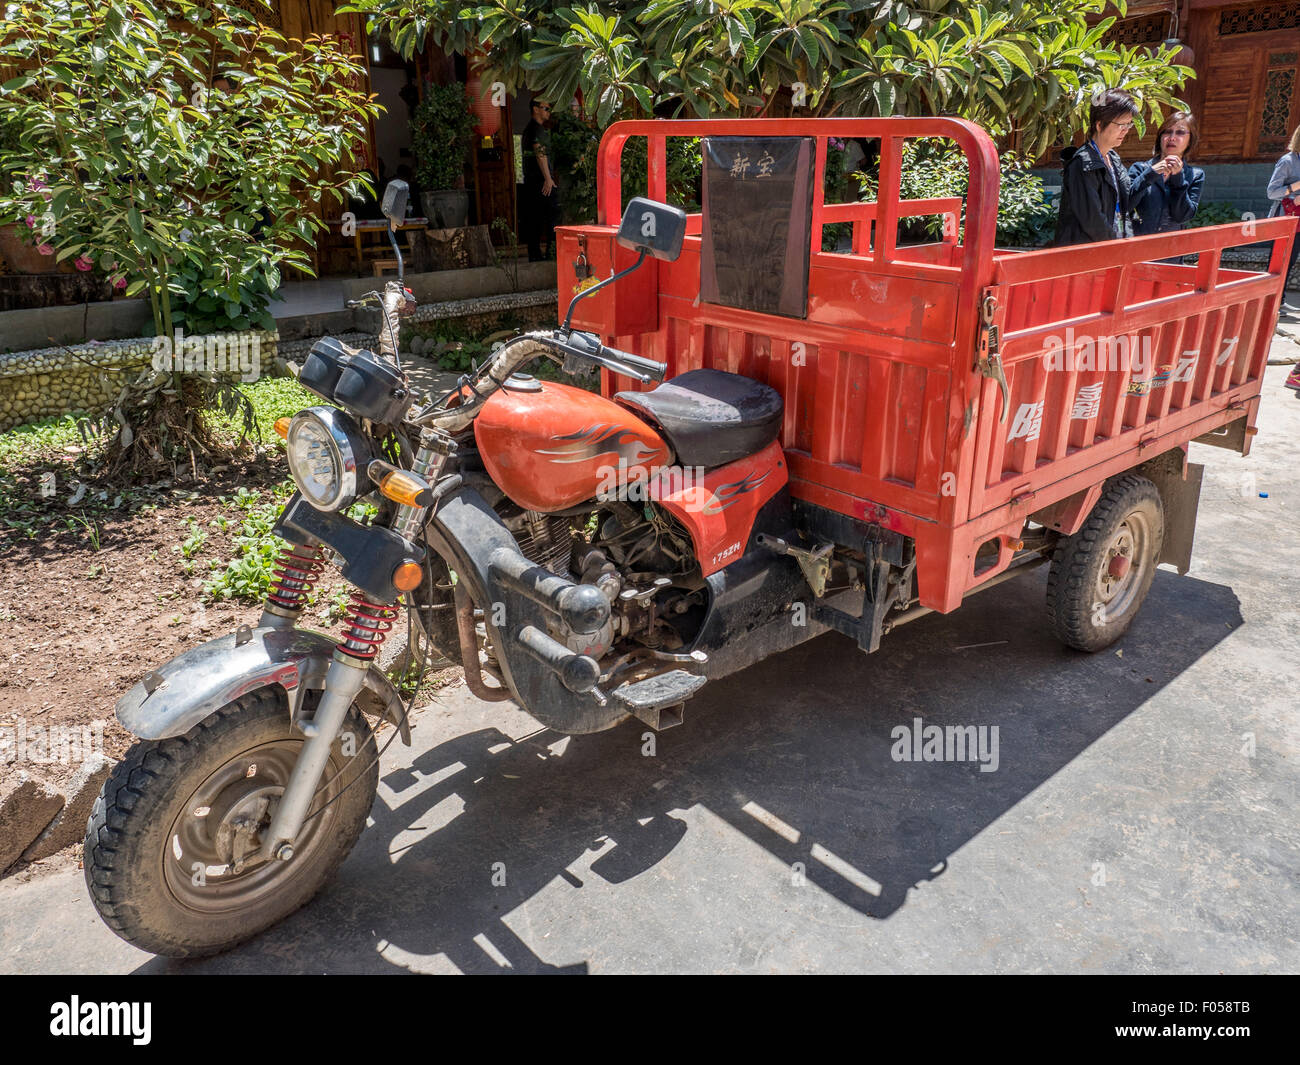 An HJ Smart Horse Motor Cycle Pick Up Vehicle In Yunnan Province China, These Motor Cycles Are Made In Chongqing Stock Photo